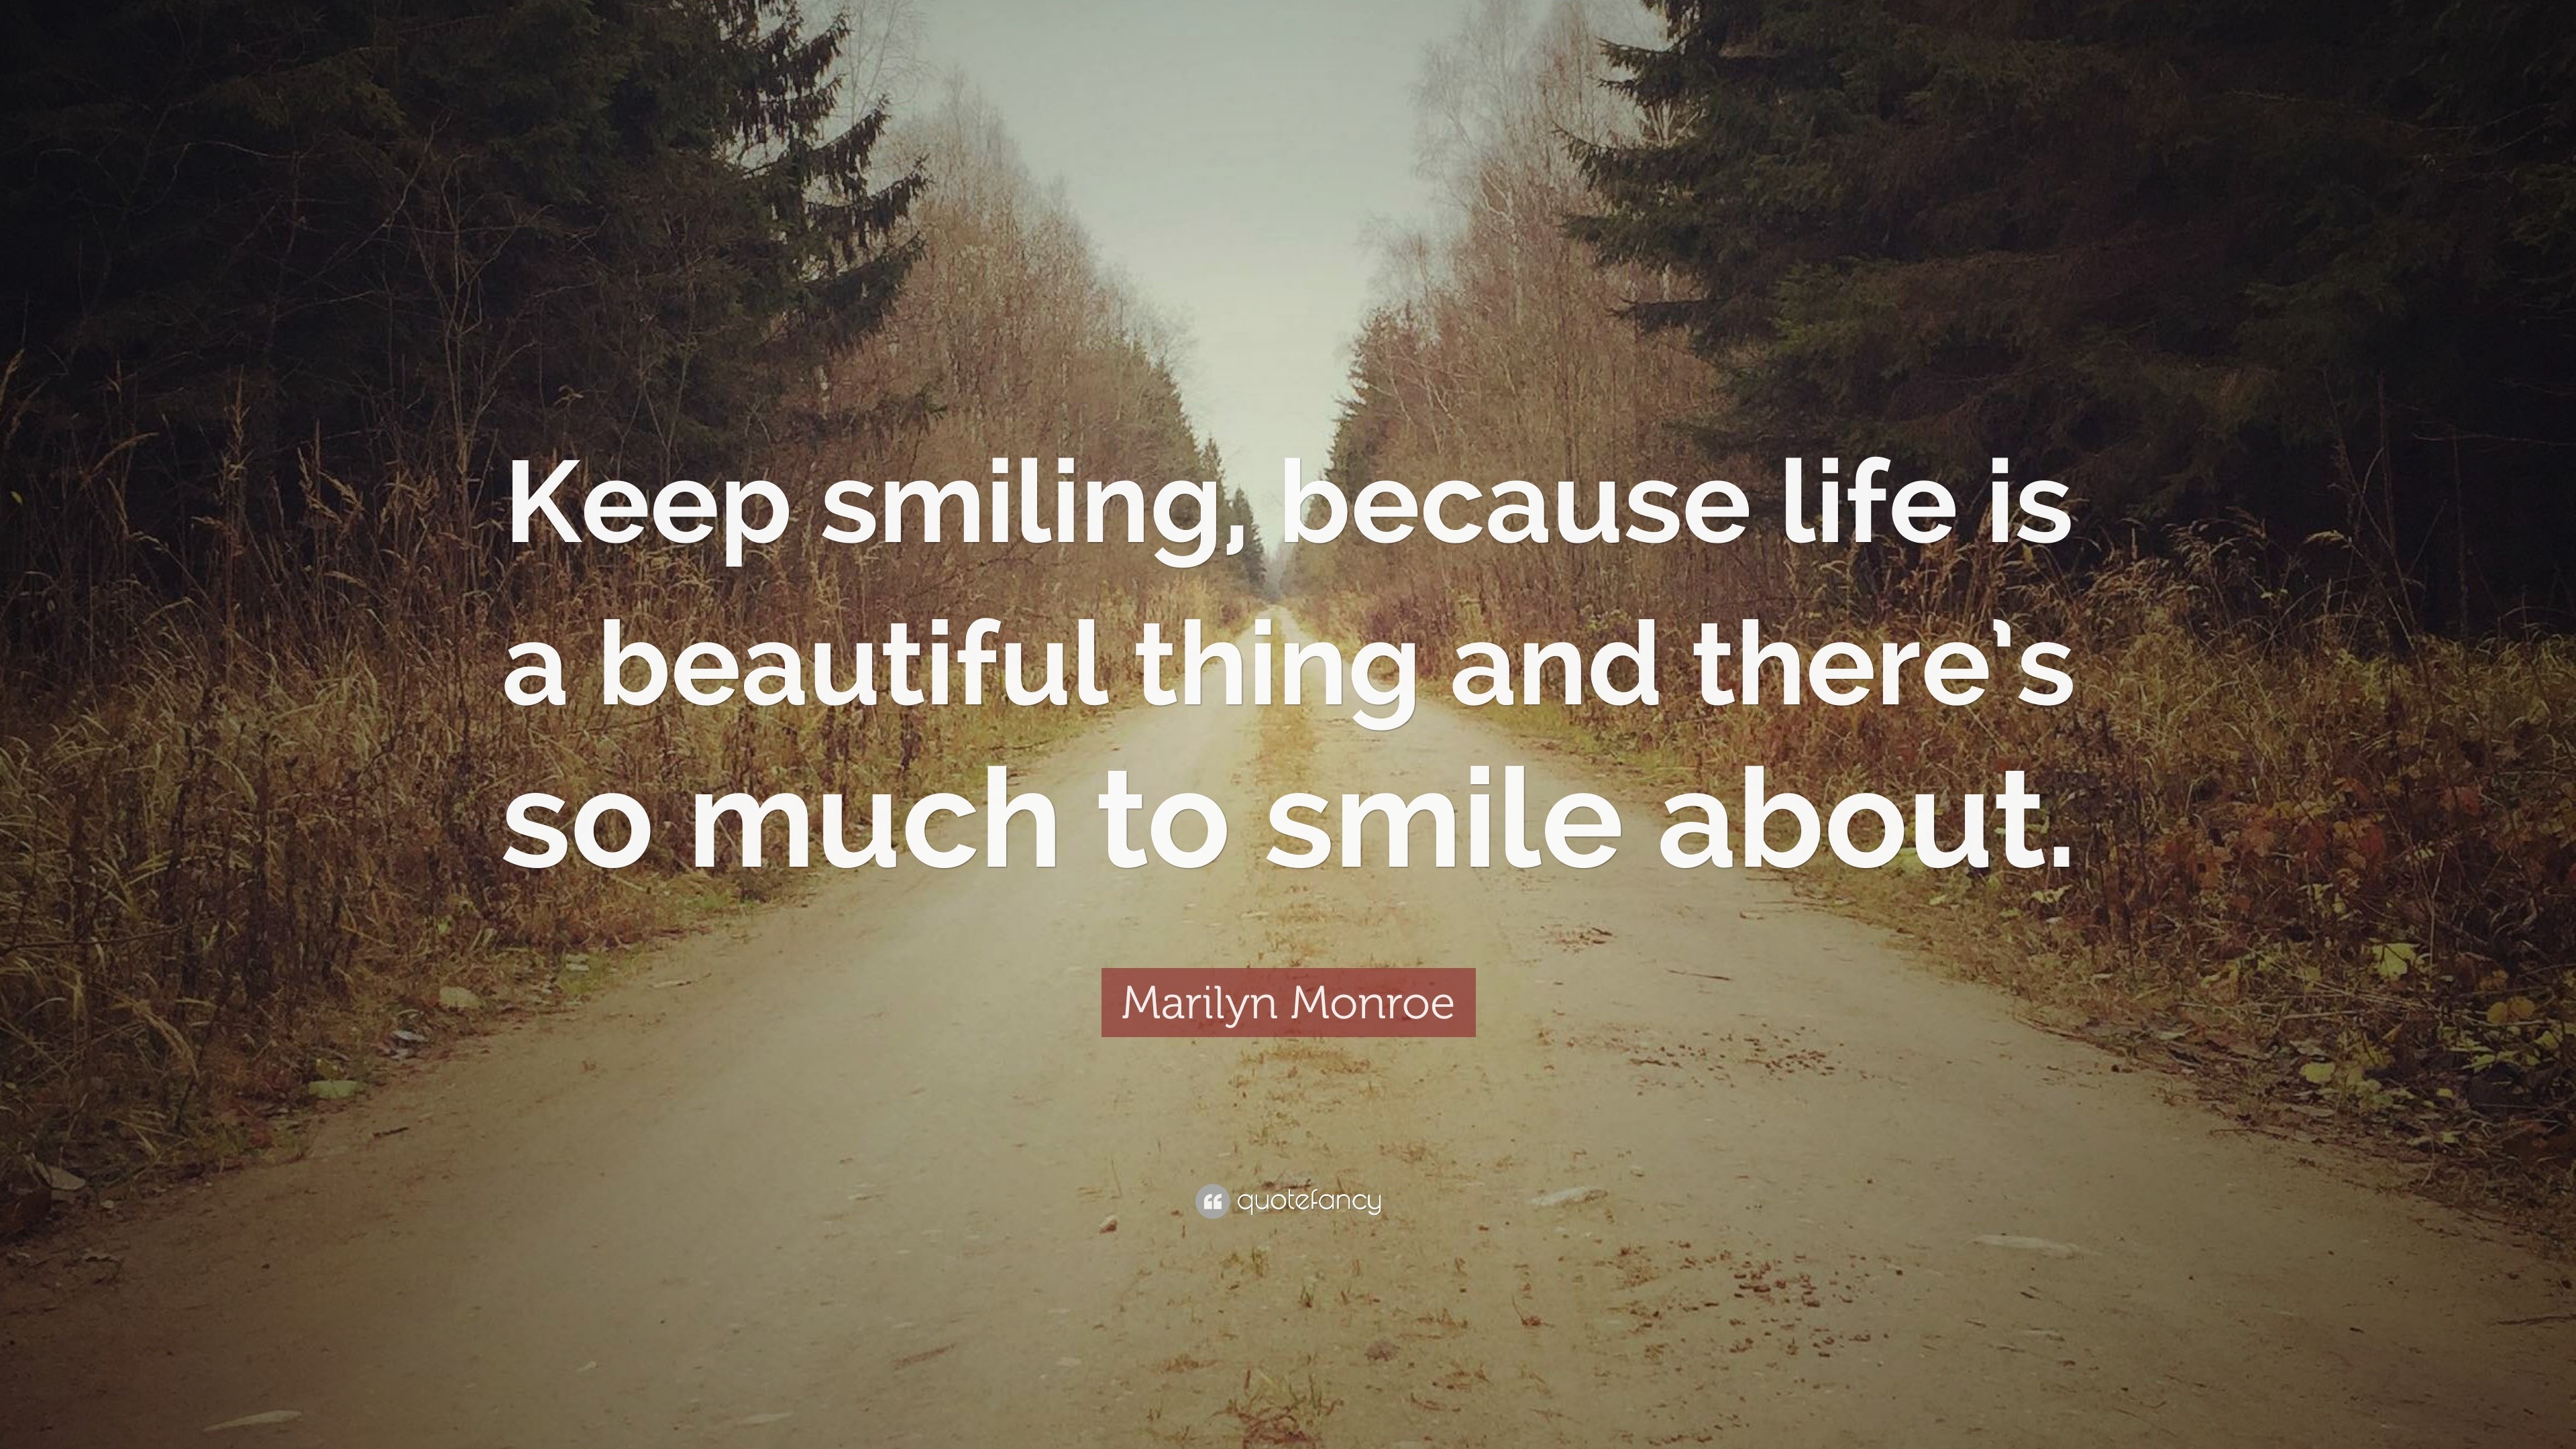 Marilyn Monroe Quotes About Smiling - smashmoms